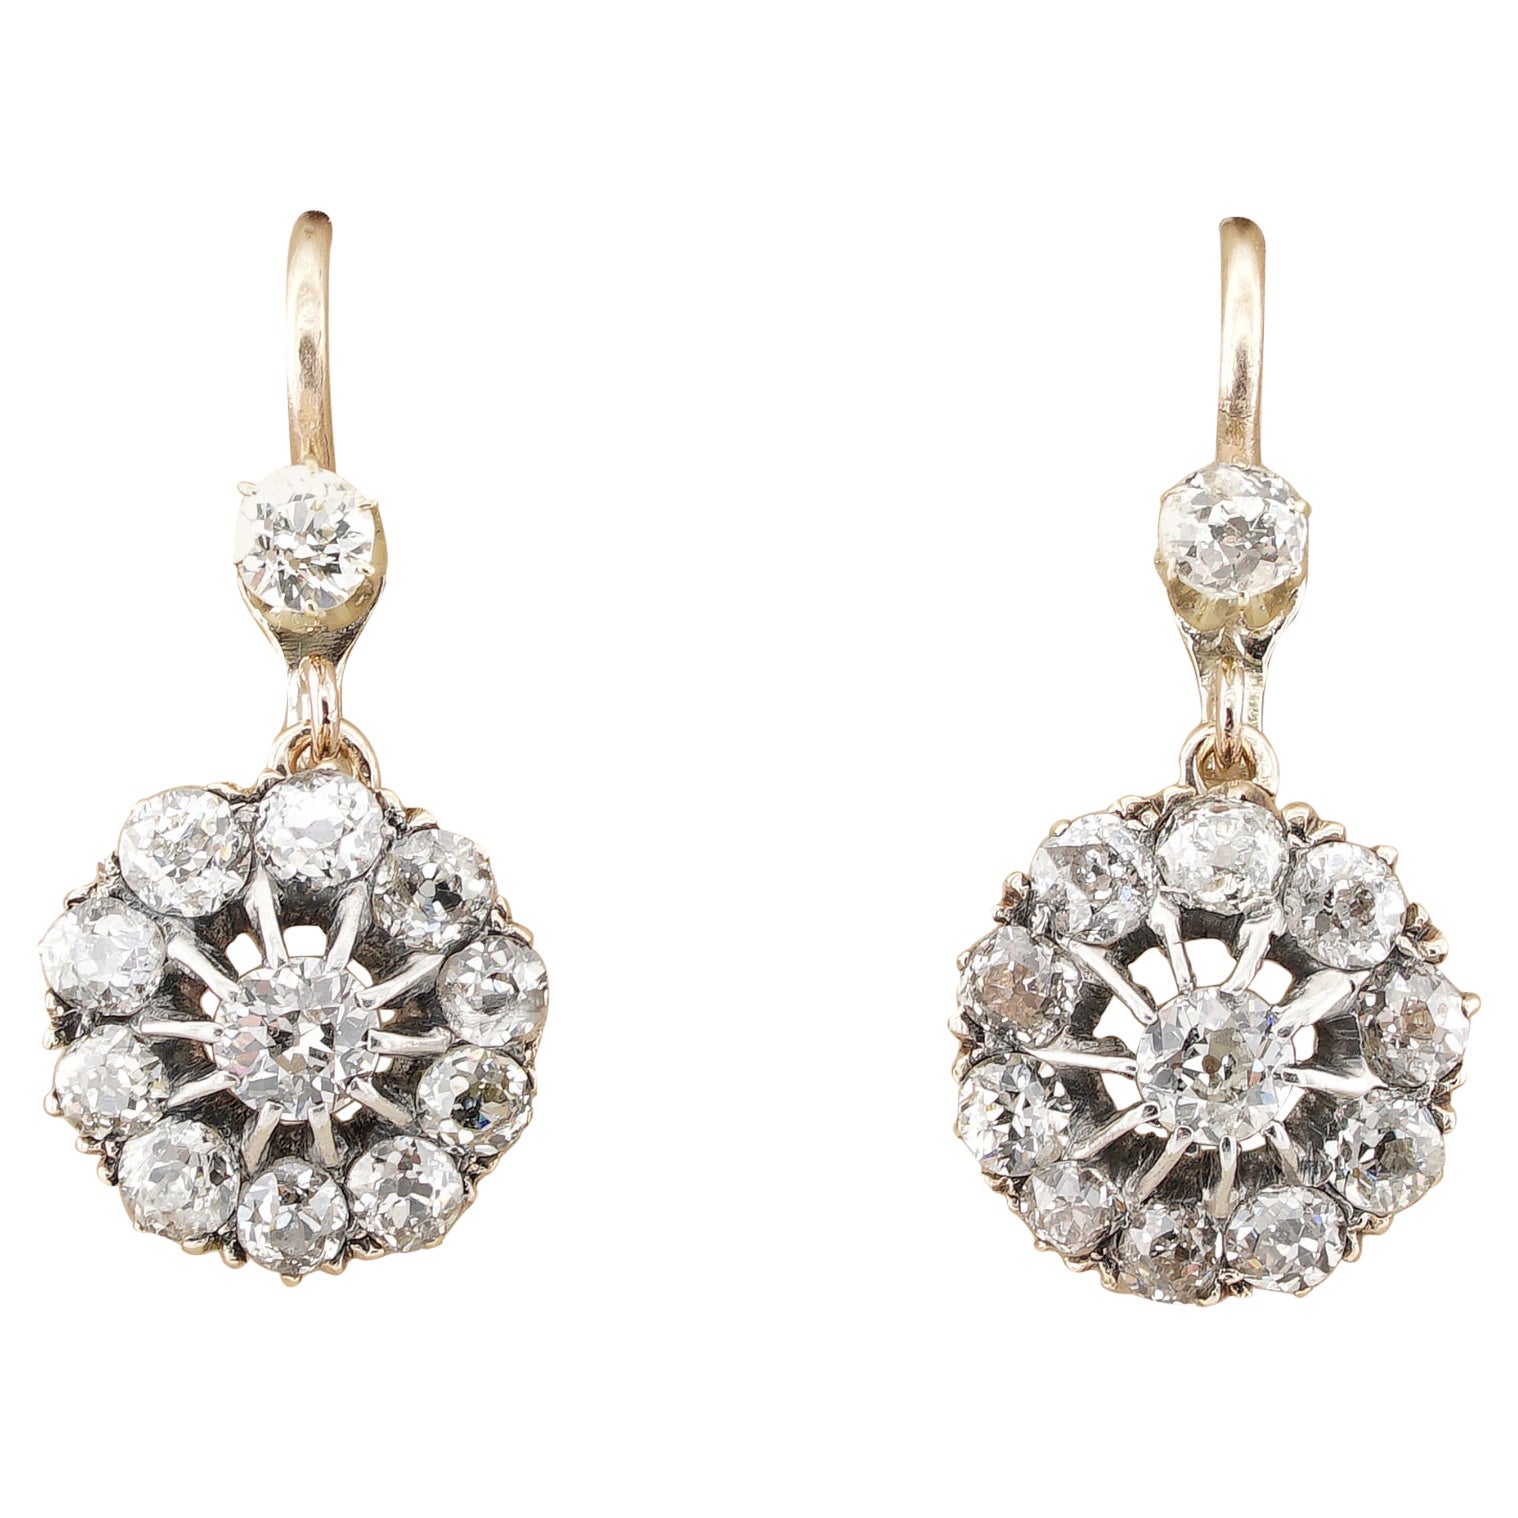 Victorian 2.20 Ct Old Diamond Cut Daisy Cluster Earrings For Sale